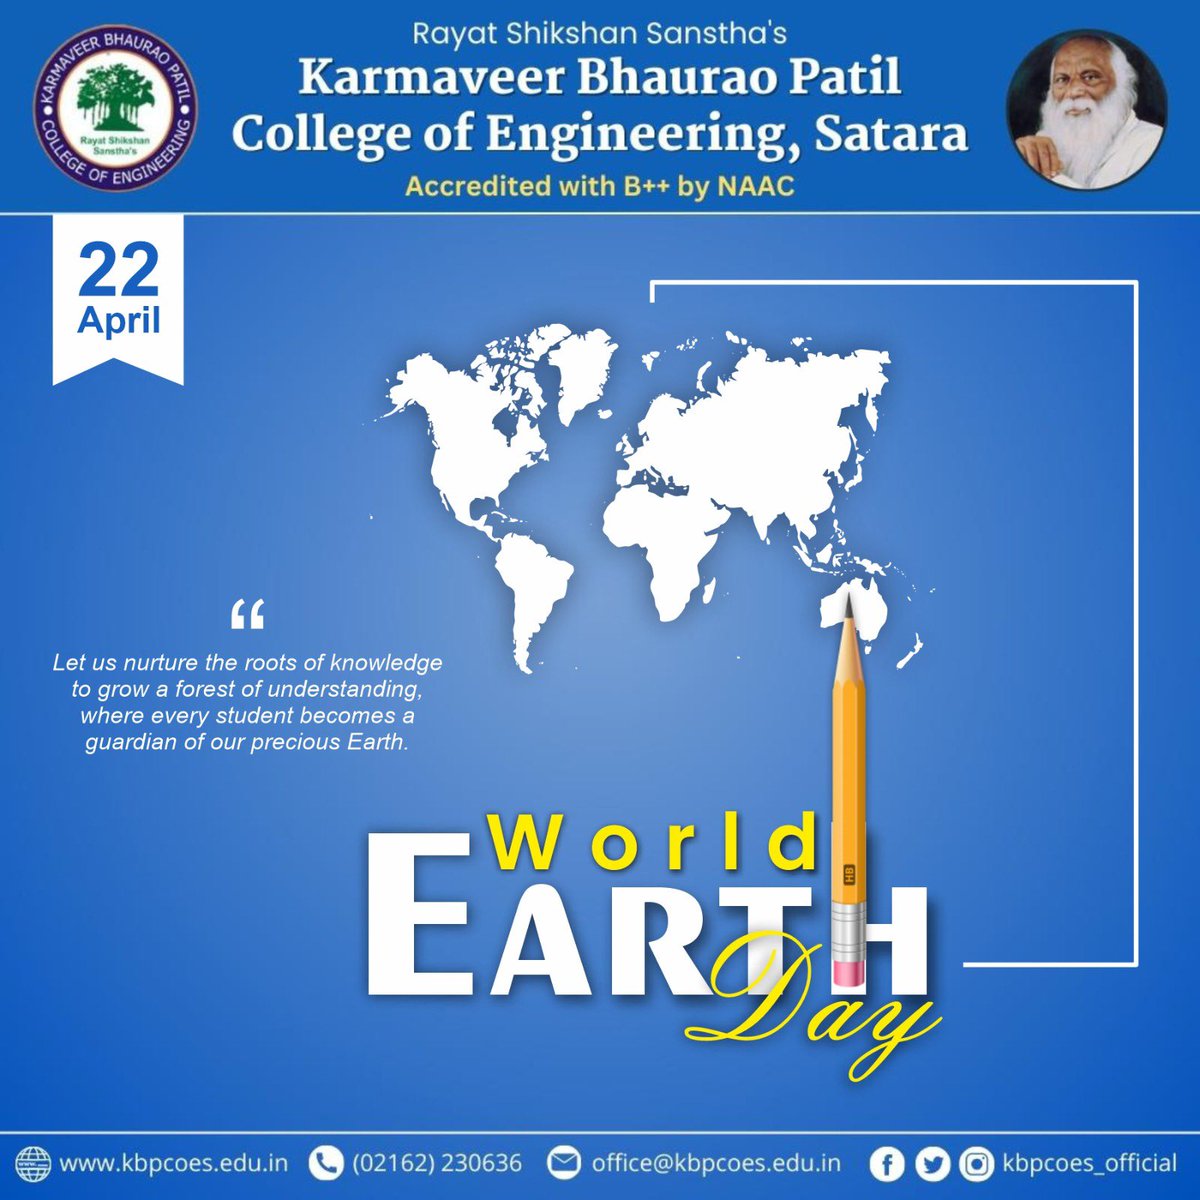 Happy Earth Day! Let’s protect our planet for future generations and cherish our planet’s resources🌍. #earth #environment #world #worldearthday #kbp #kbpcoes #engineering #college #civil #mechanical #electronics #electronics #computer #civilengineering #mechanicalengineering